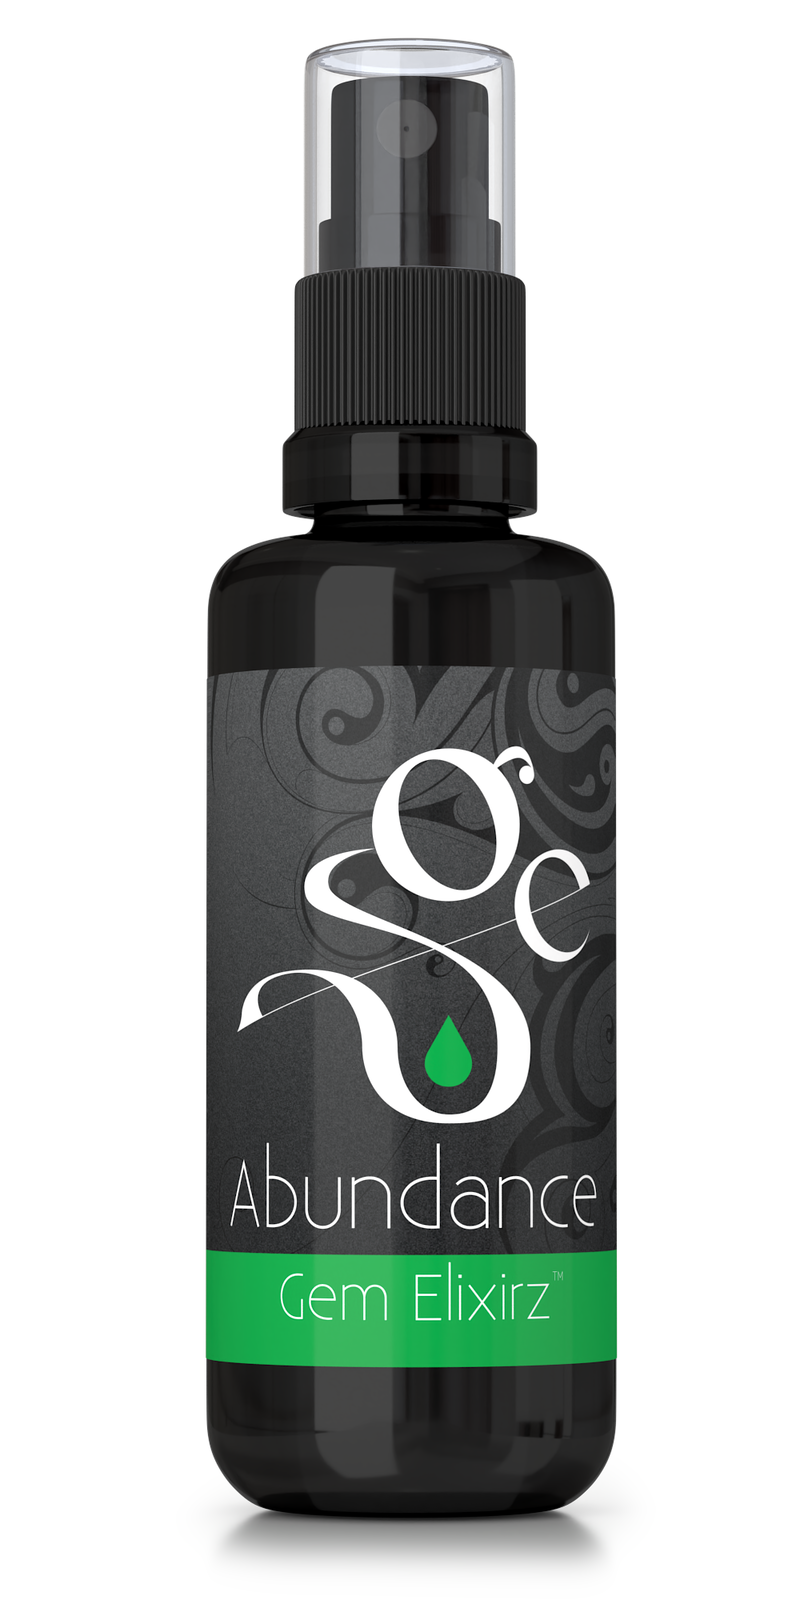 Abundance aromatherapy spray with essential oils and gemstones, frontside of bottle